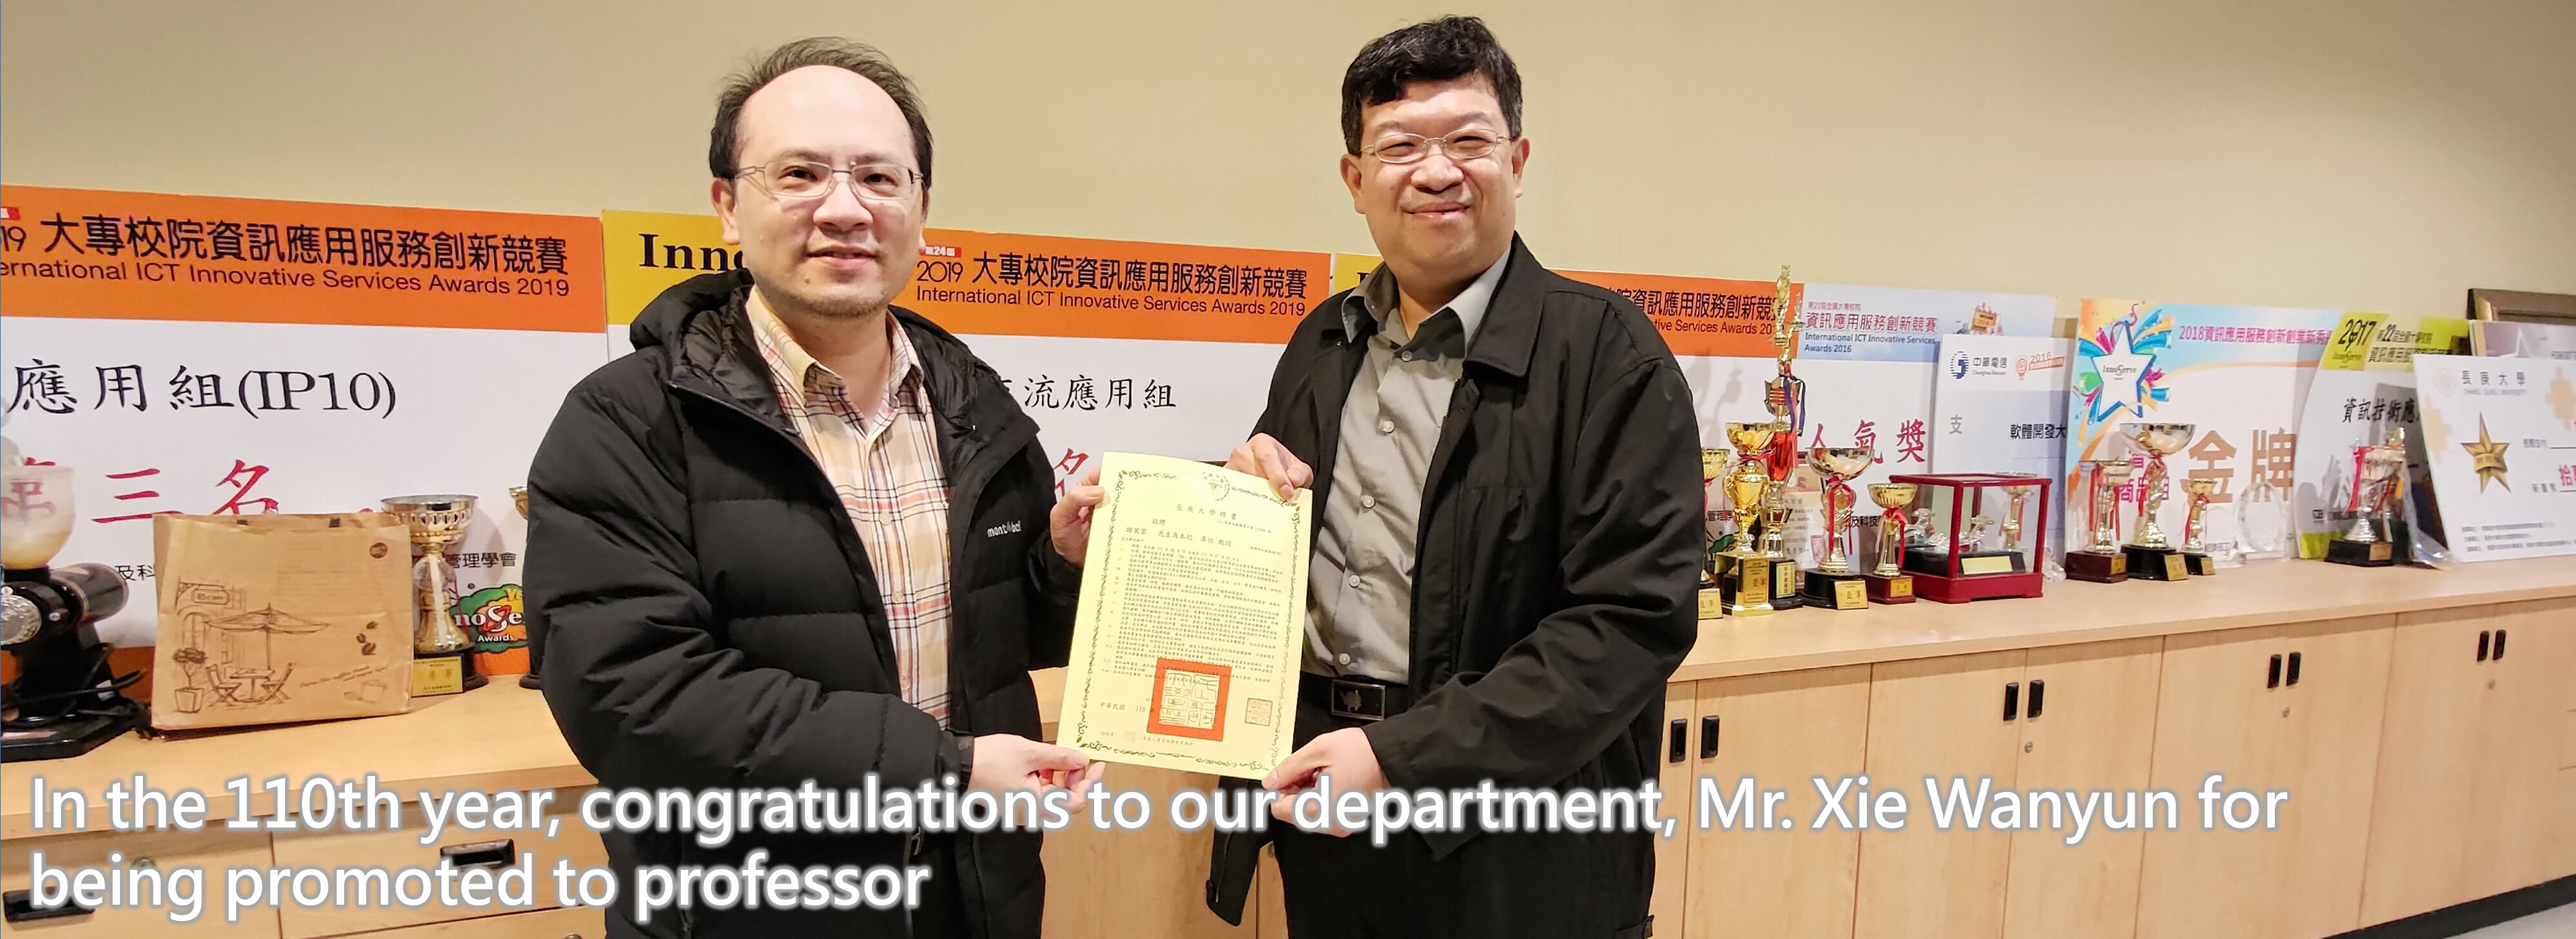 In the 110th year, congratulations to our department, Mr. Xie Wanyun for being promoted to professor